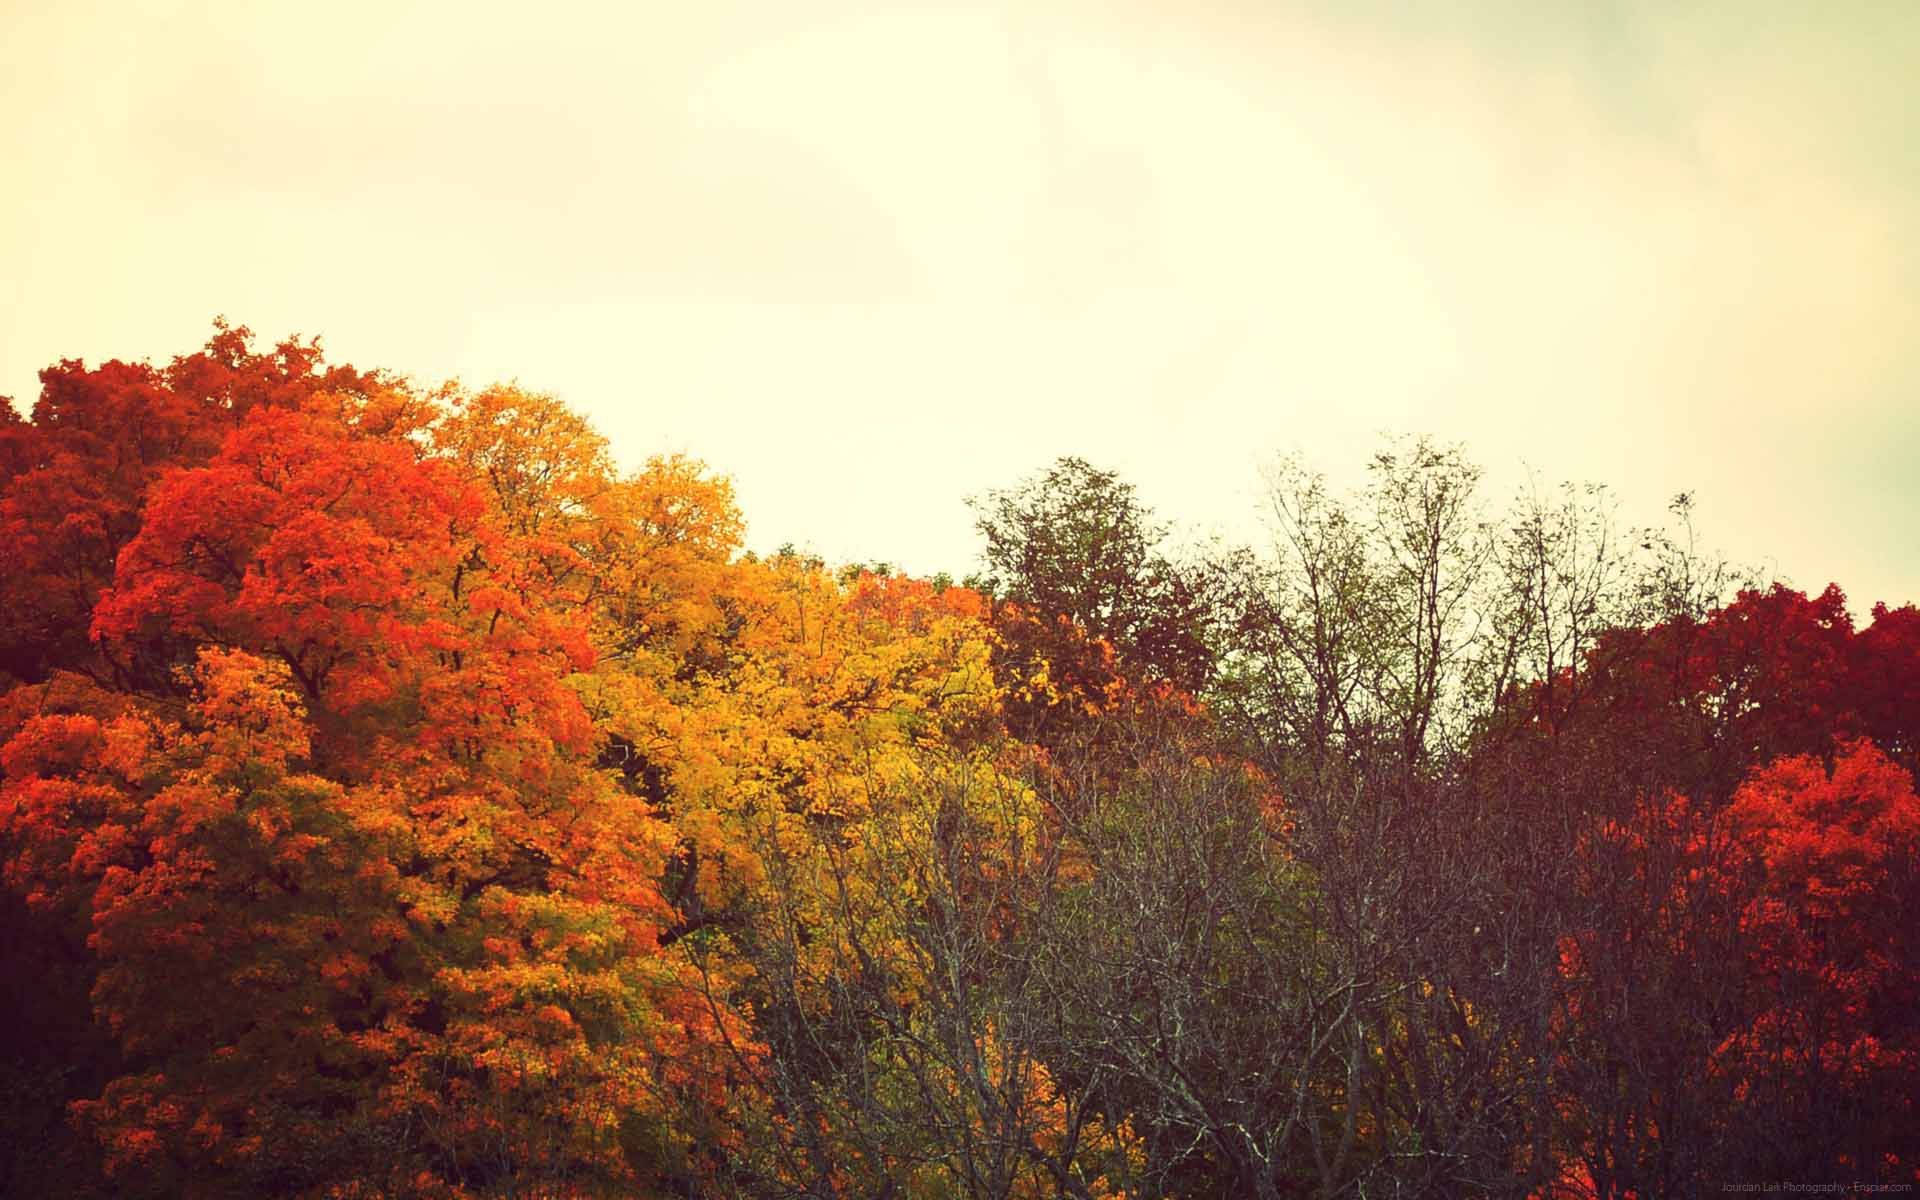 Cute Autumn Macbook Wallpapers posted by Michelle Walker.